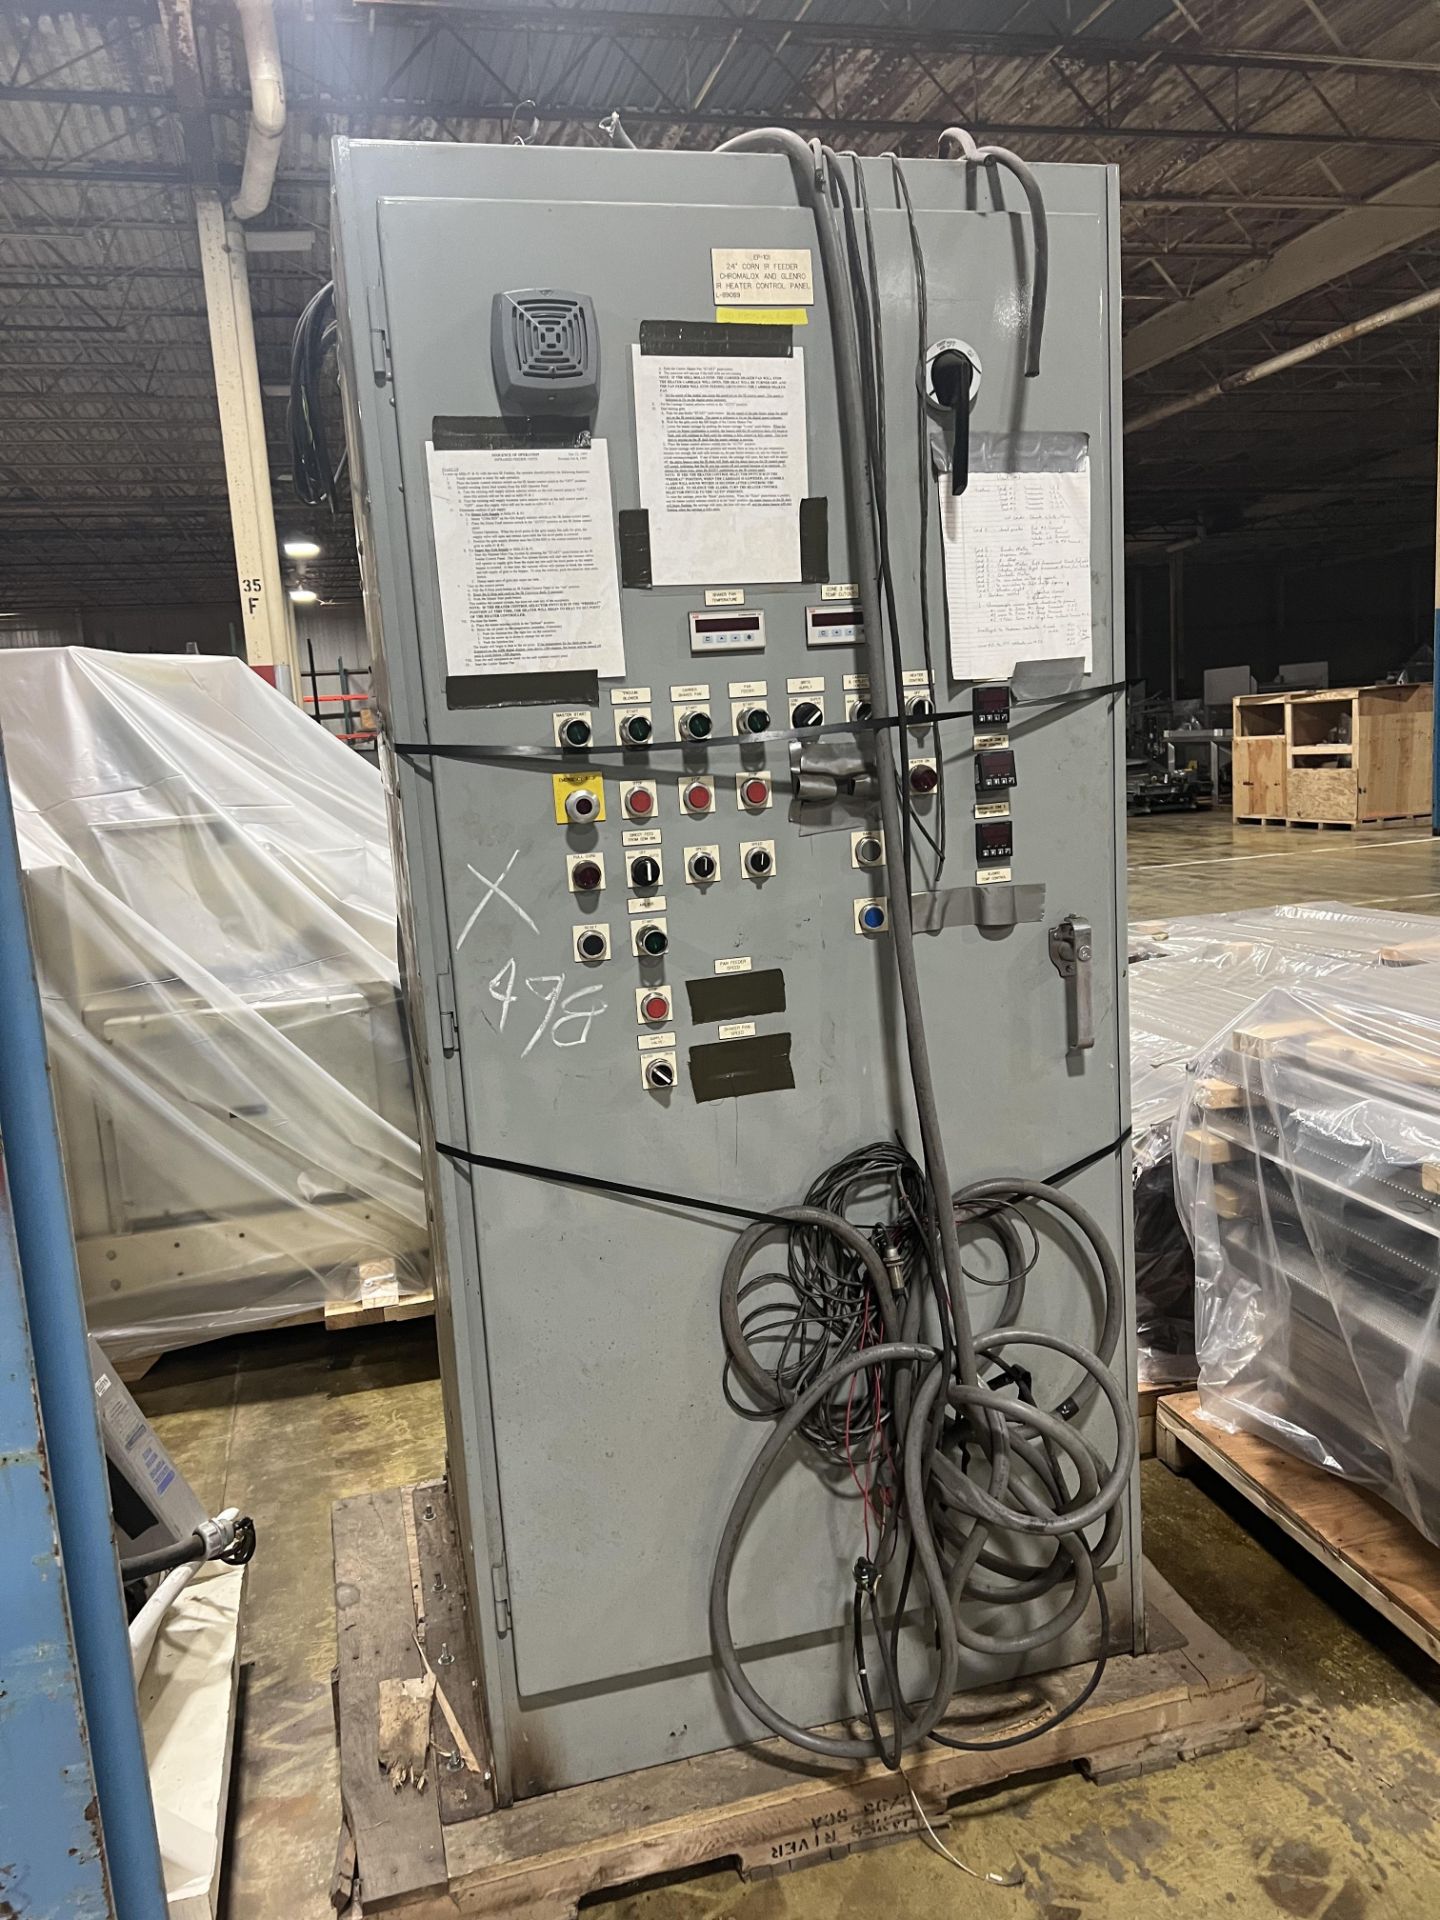 Carrier/Chromalox IR Feeders and Conveyor Units wirt Control Panel, Rigging/Loading Fee: $900 - Image 14 of 16